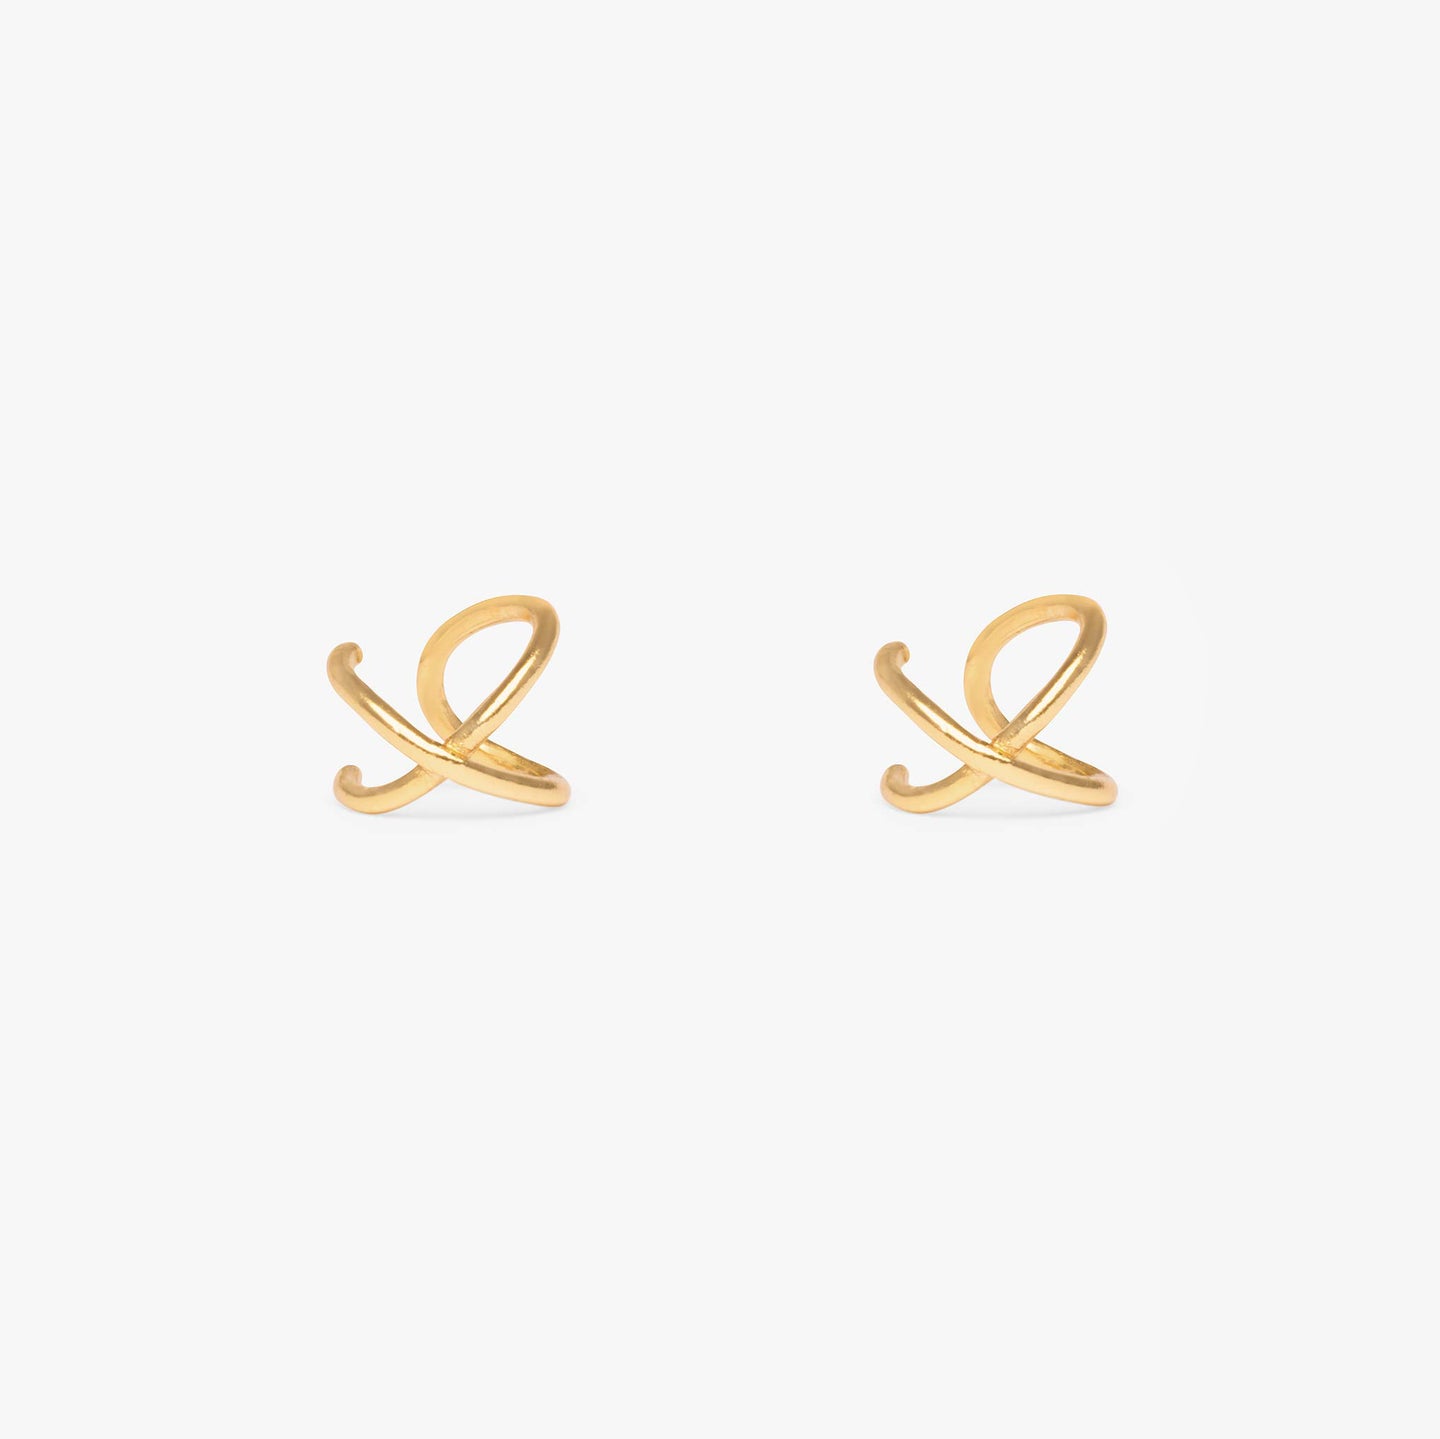 Cuff that crosses to form an X shape in gold. No piercing required. [pair] color:gold